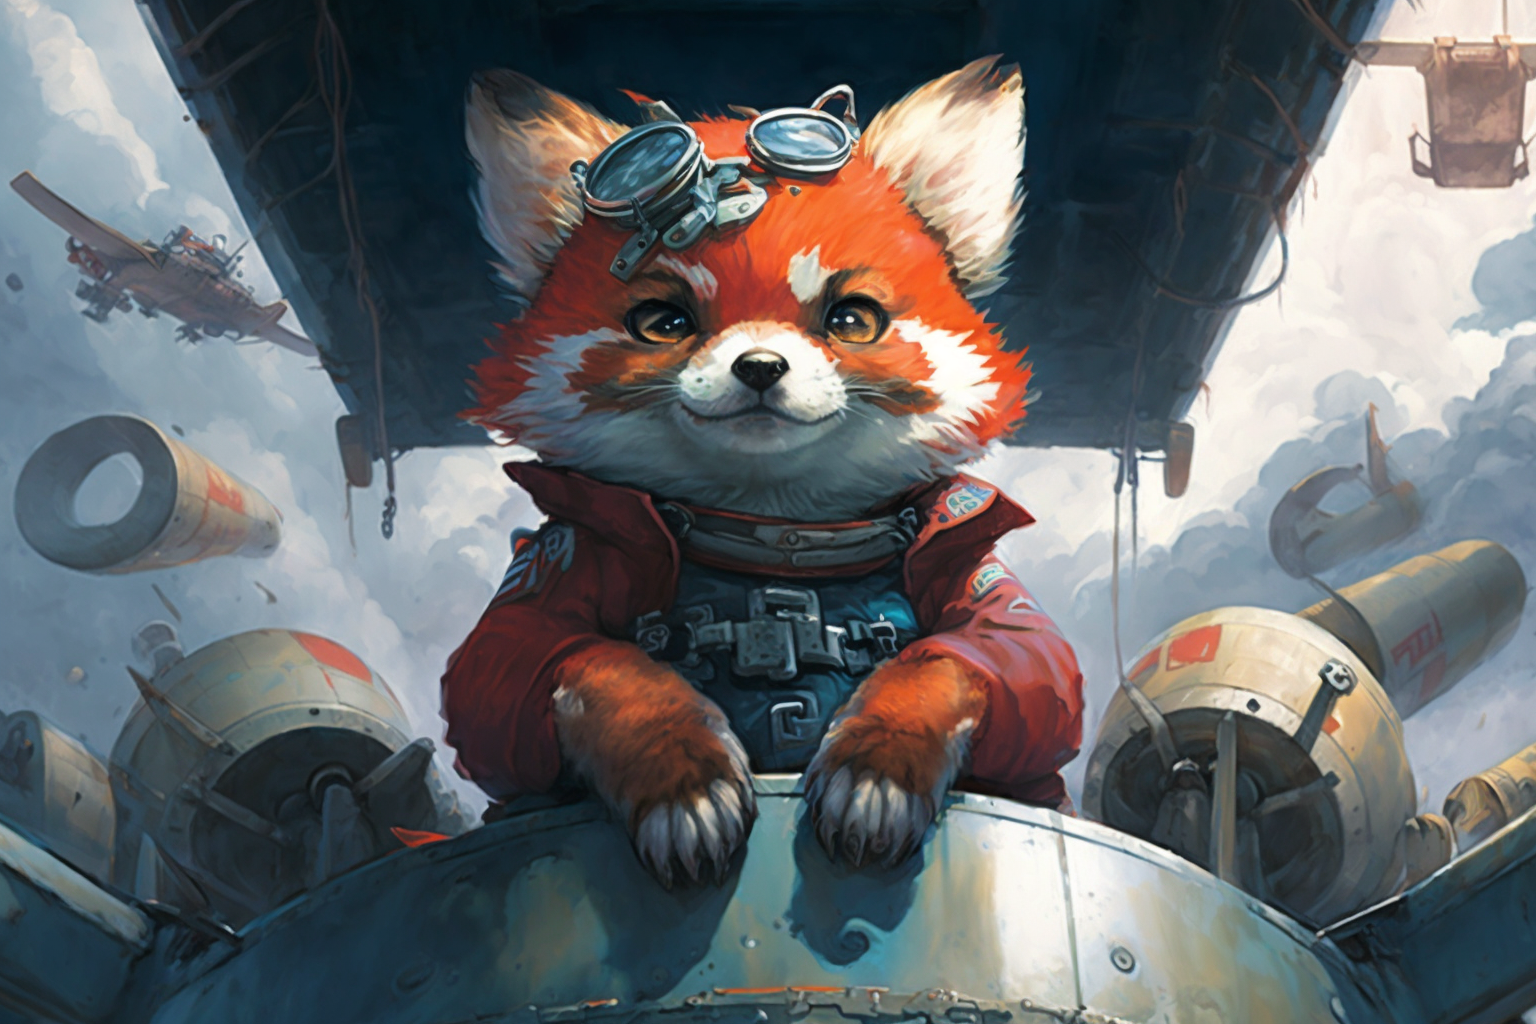 MrNoMbre_a_cute_and_fluffy_red_panda_with_pilot_outfit_view_fro_9c3437e6-01ba-460d-b294-f9ce5d4bf124.png